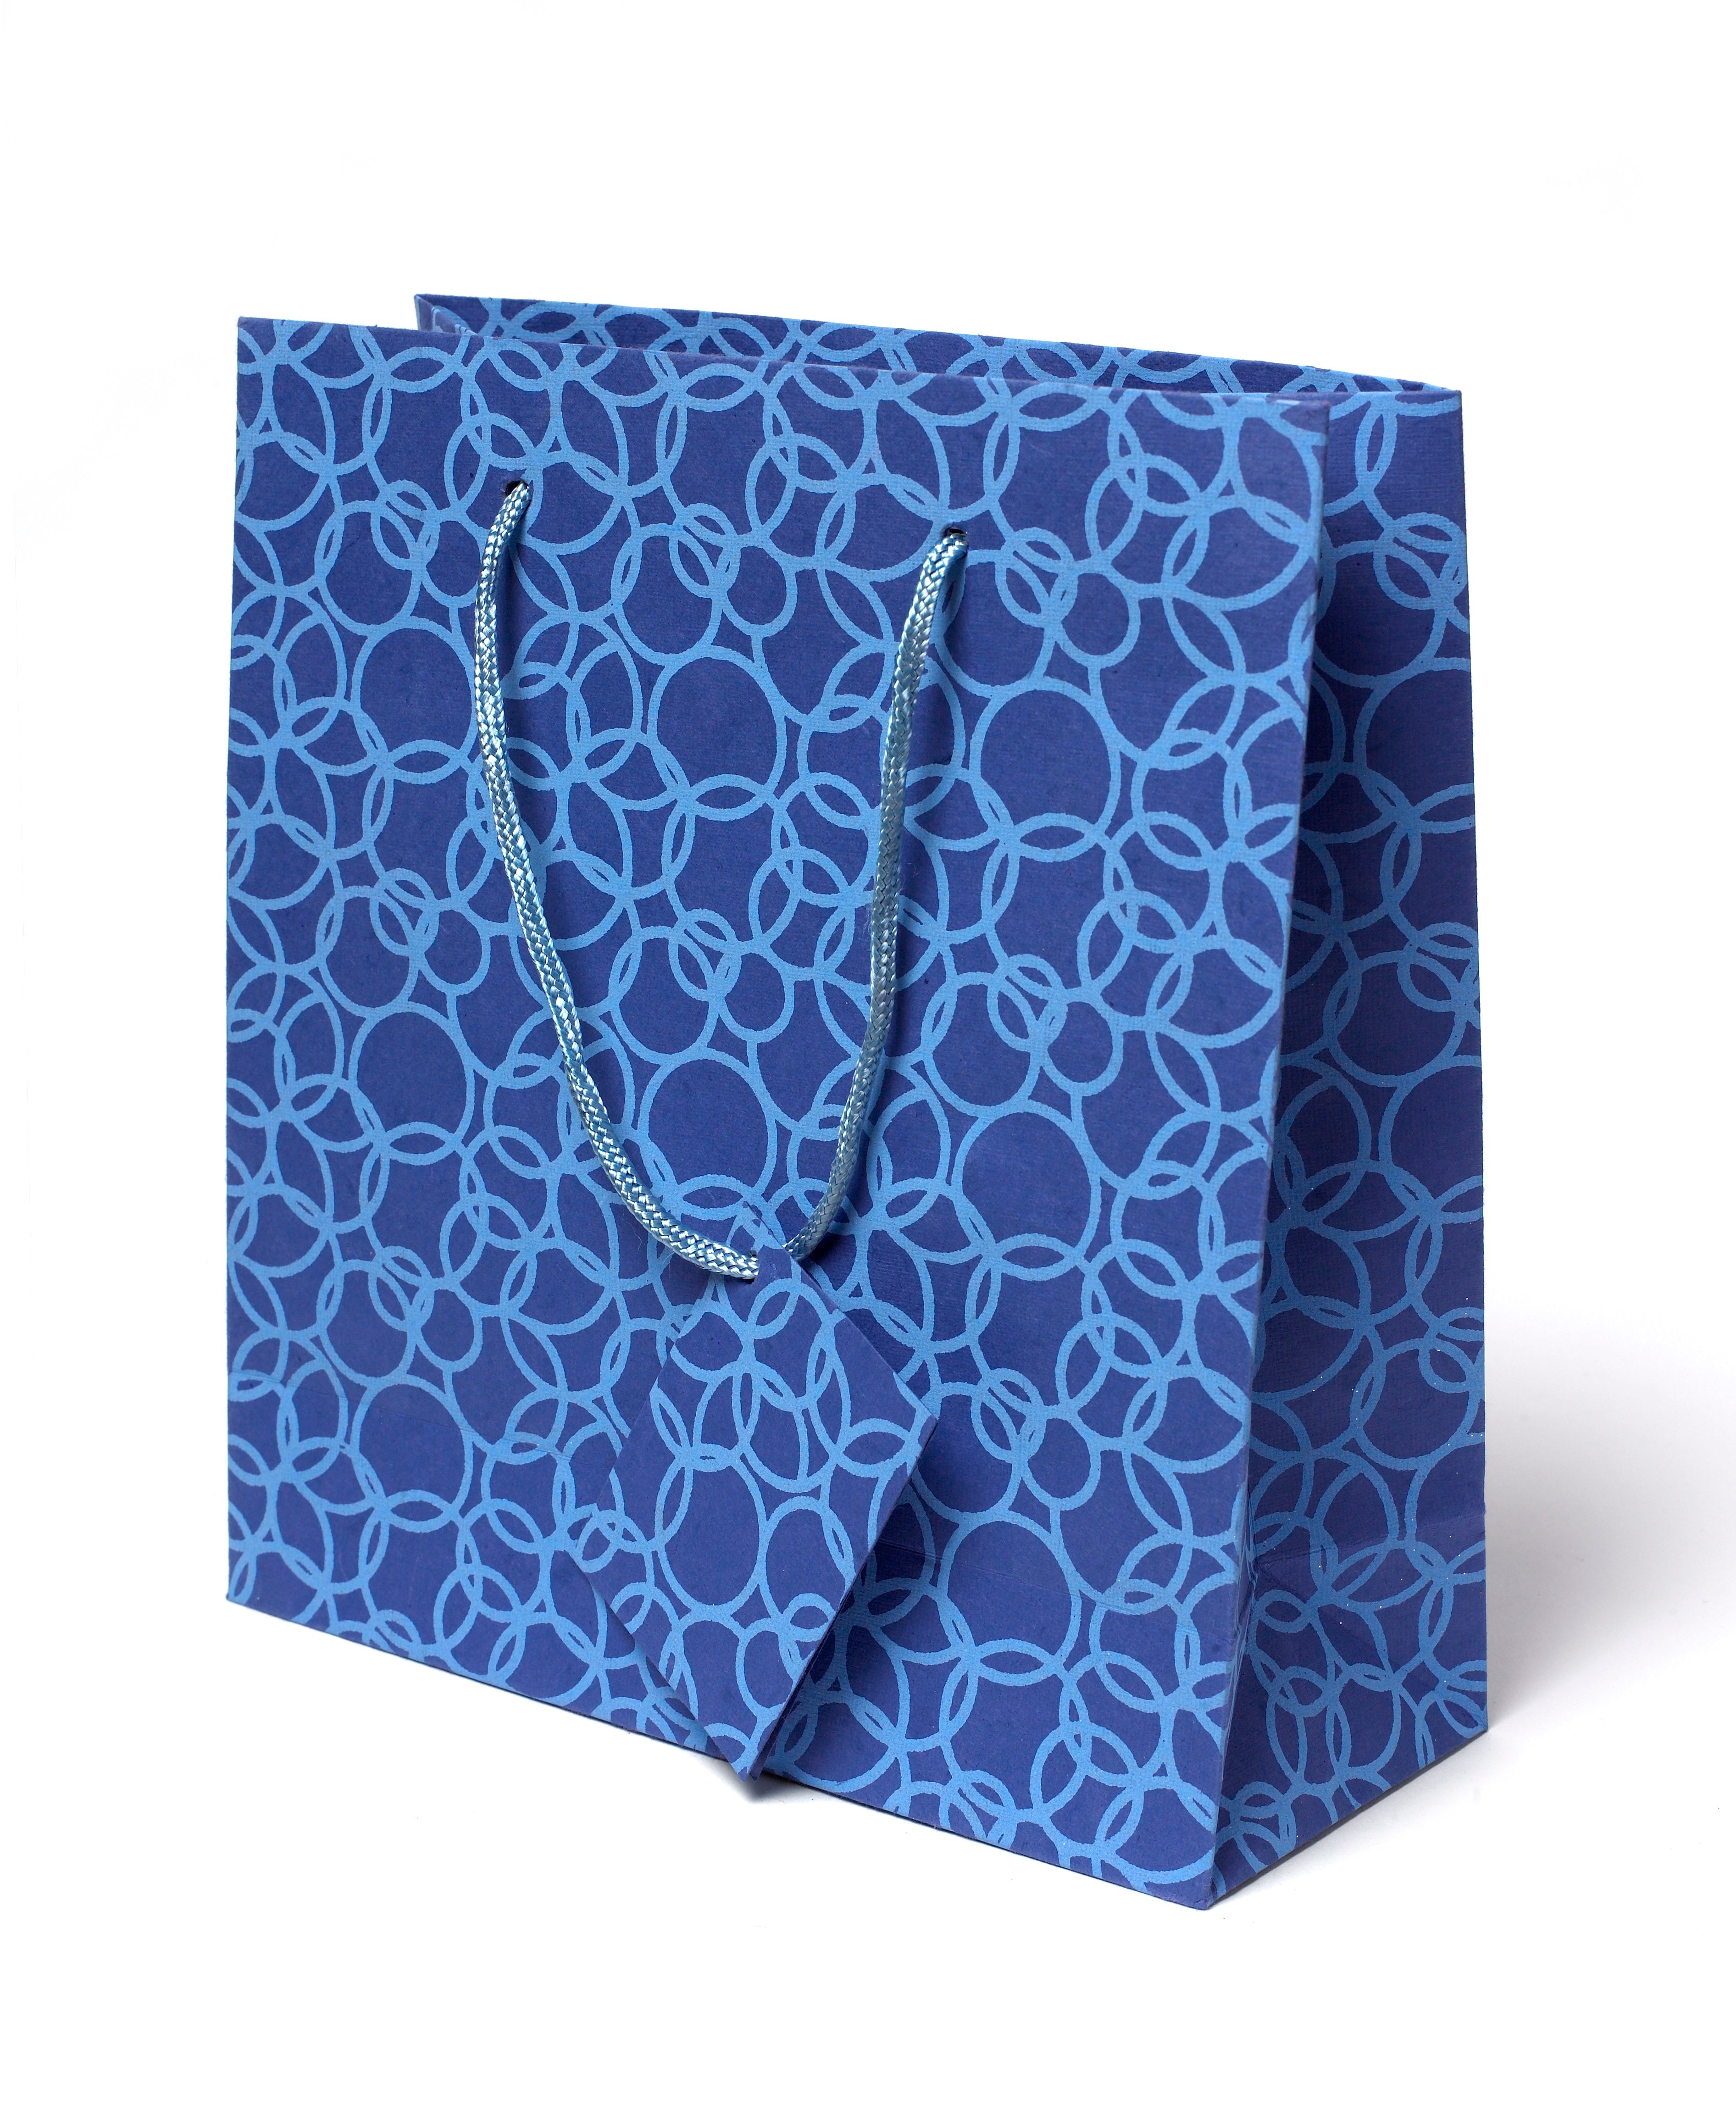 Set Of Six 10" X 6" Recycled Cotton Gift Bags With Tag In Blue Circles Design